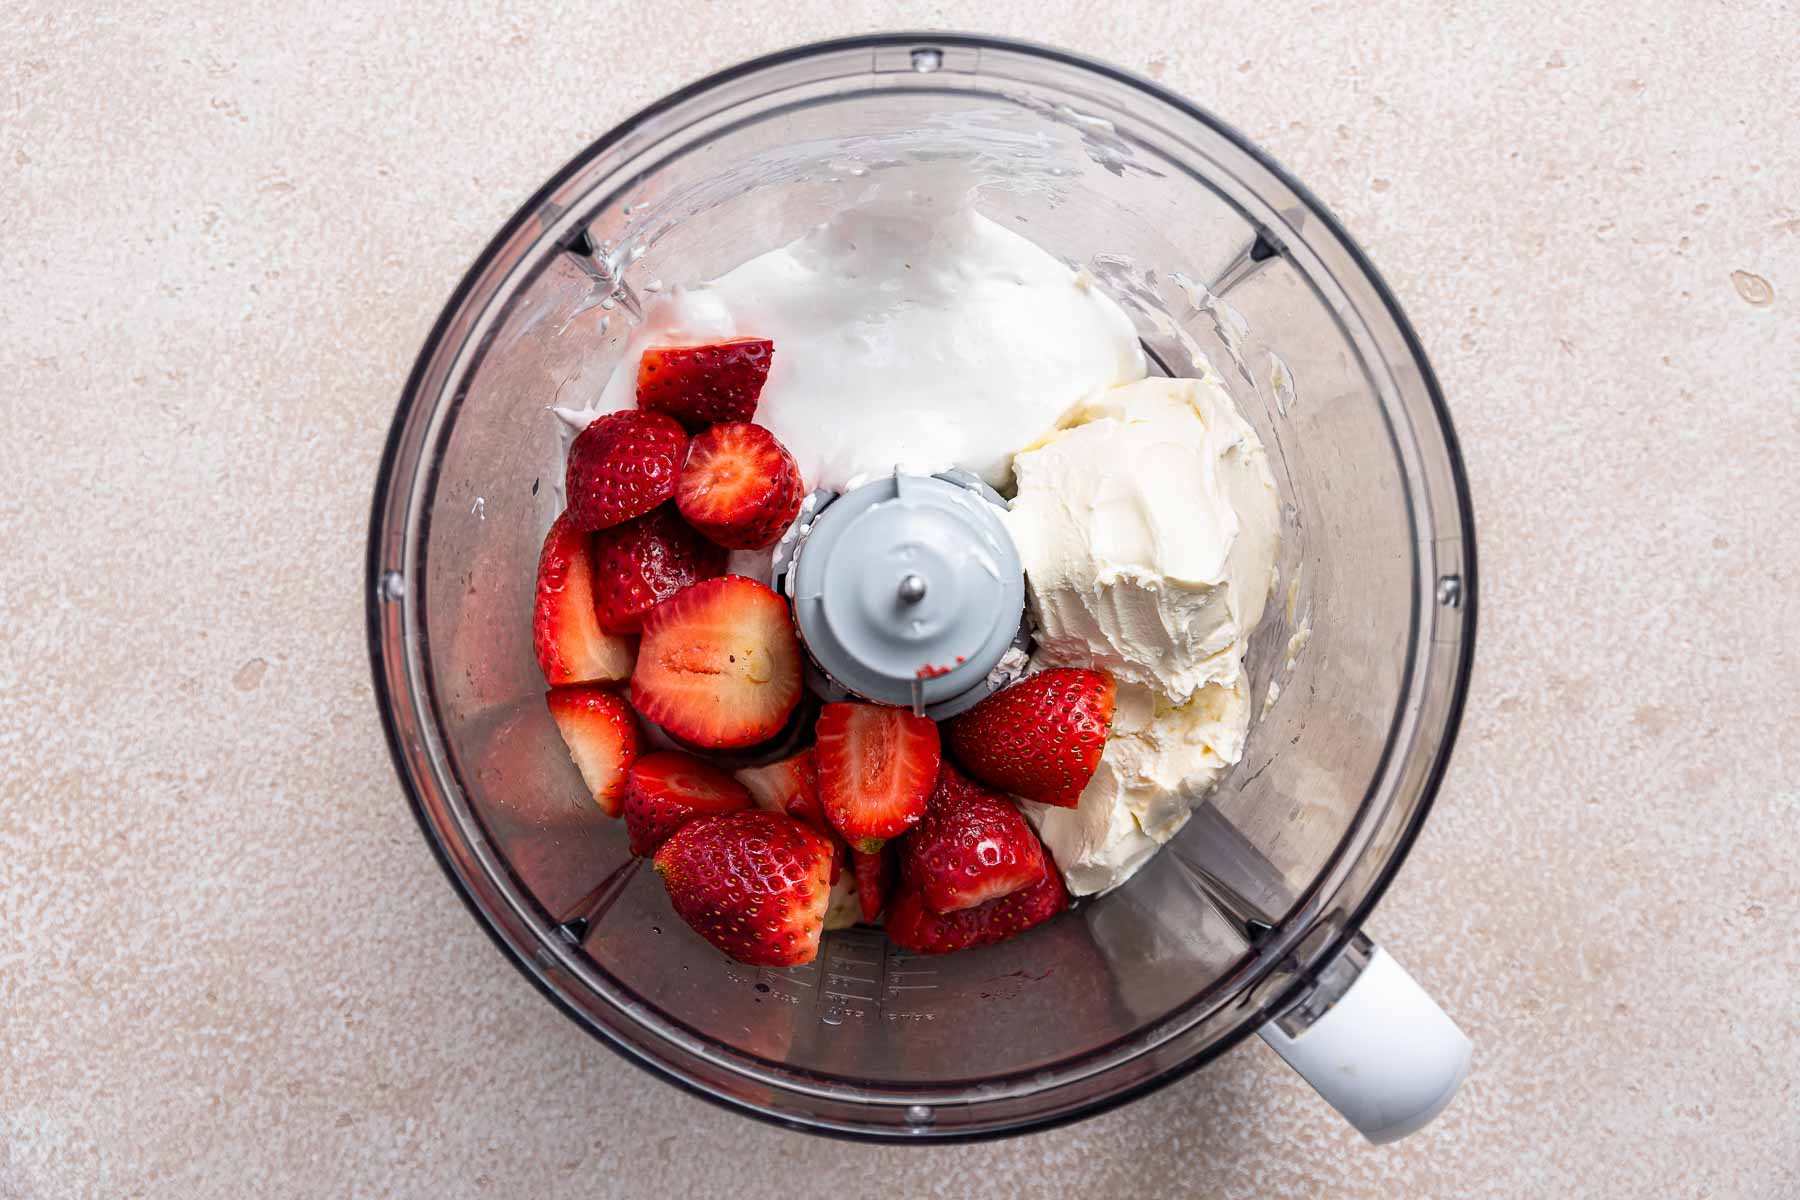 Strawberries and cream in a food processor bowl.